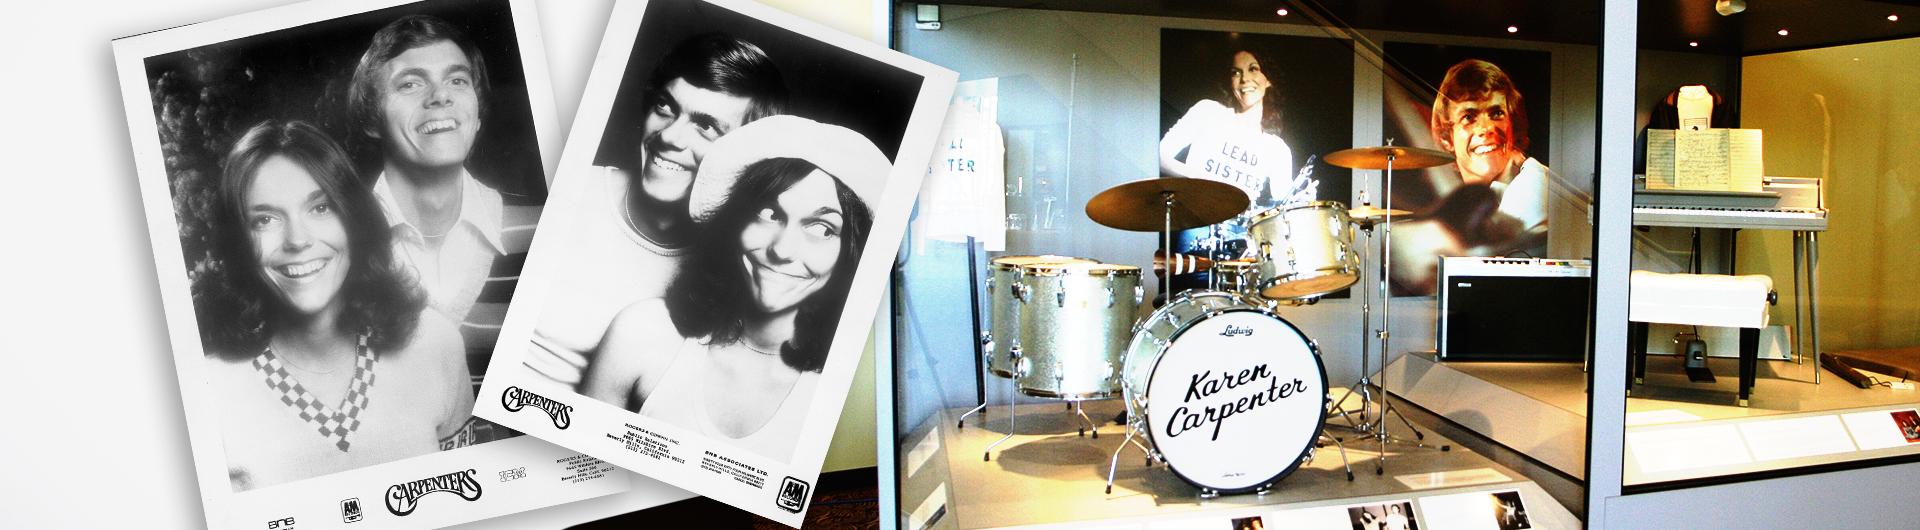 Photographs of Richard and Karen Carpenter as well as part of the Carpenter Exhibit in the lobby featuring Karen's drumset and Richard's keyboard.